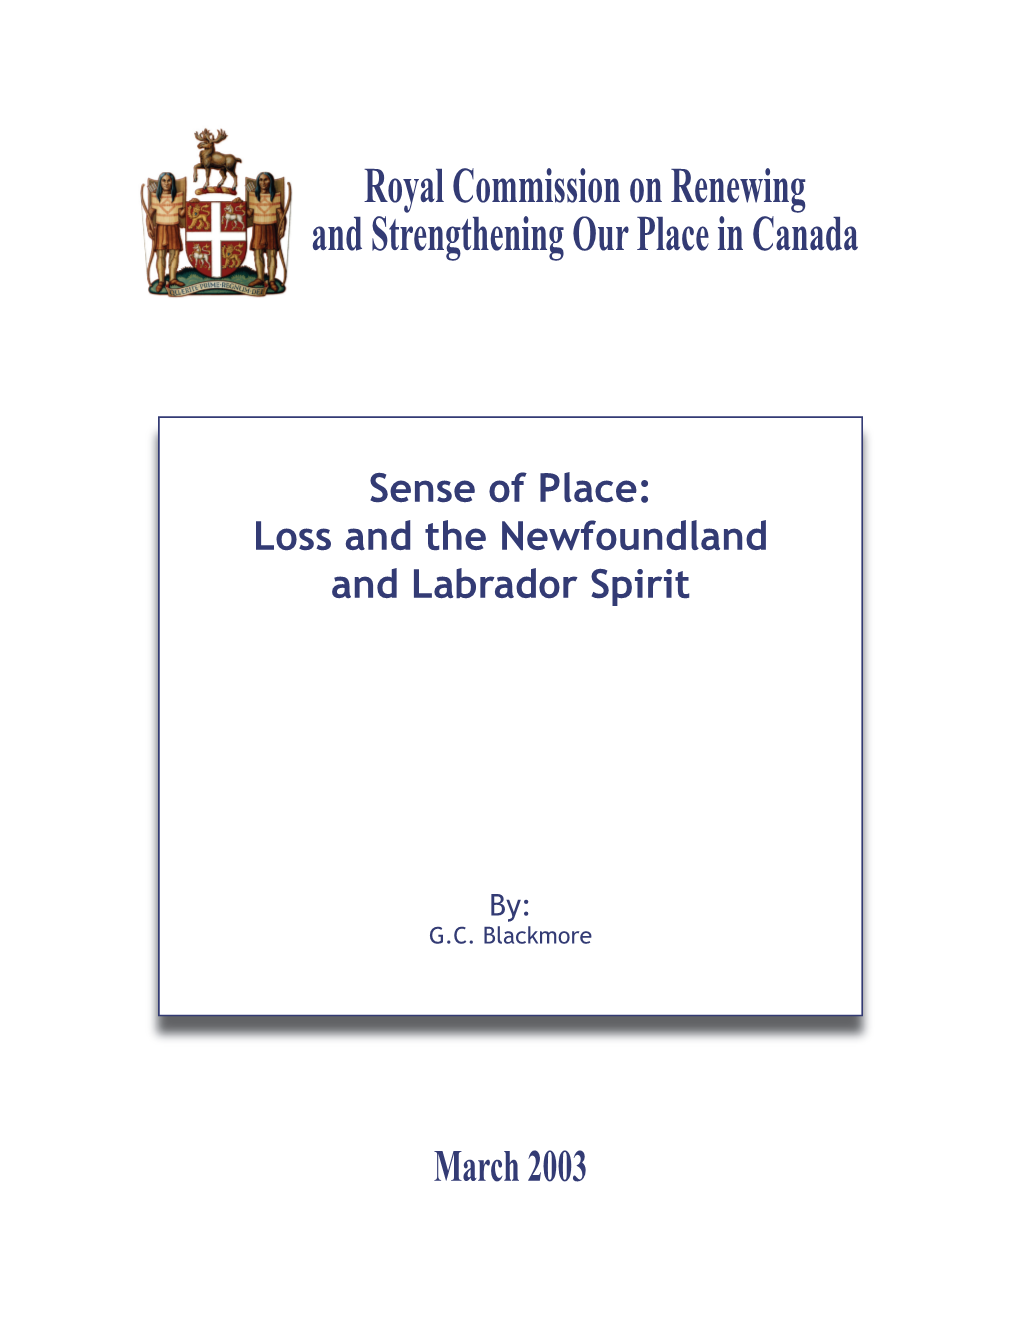 Royal Commission on Renewing and Strengthening Our Place in Canada